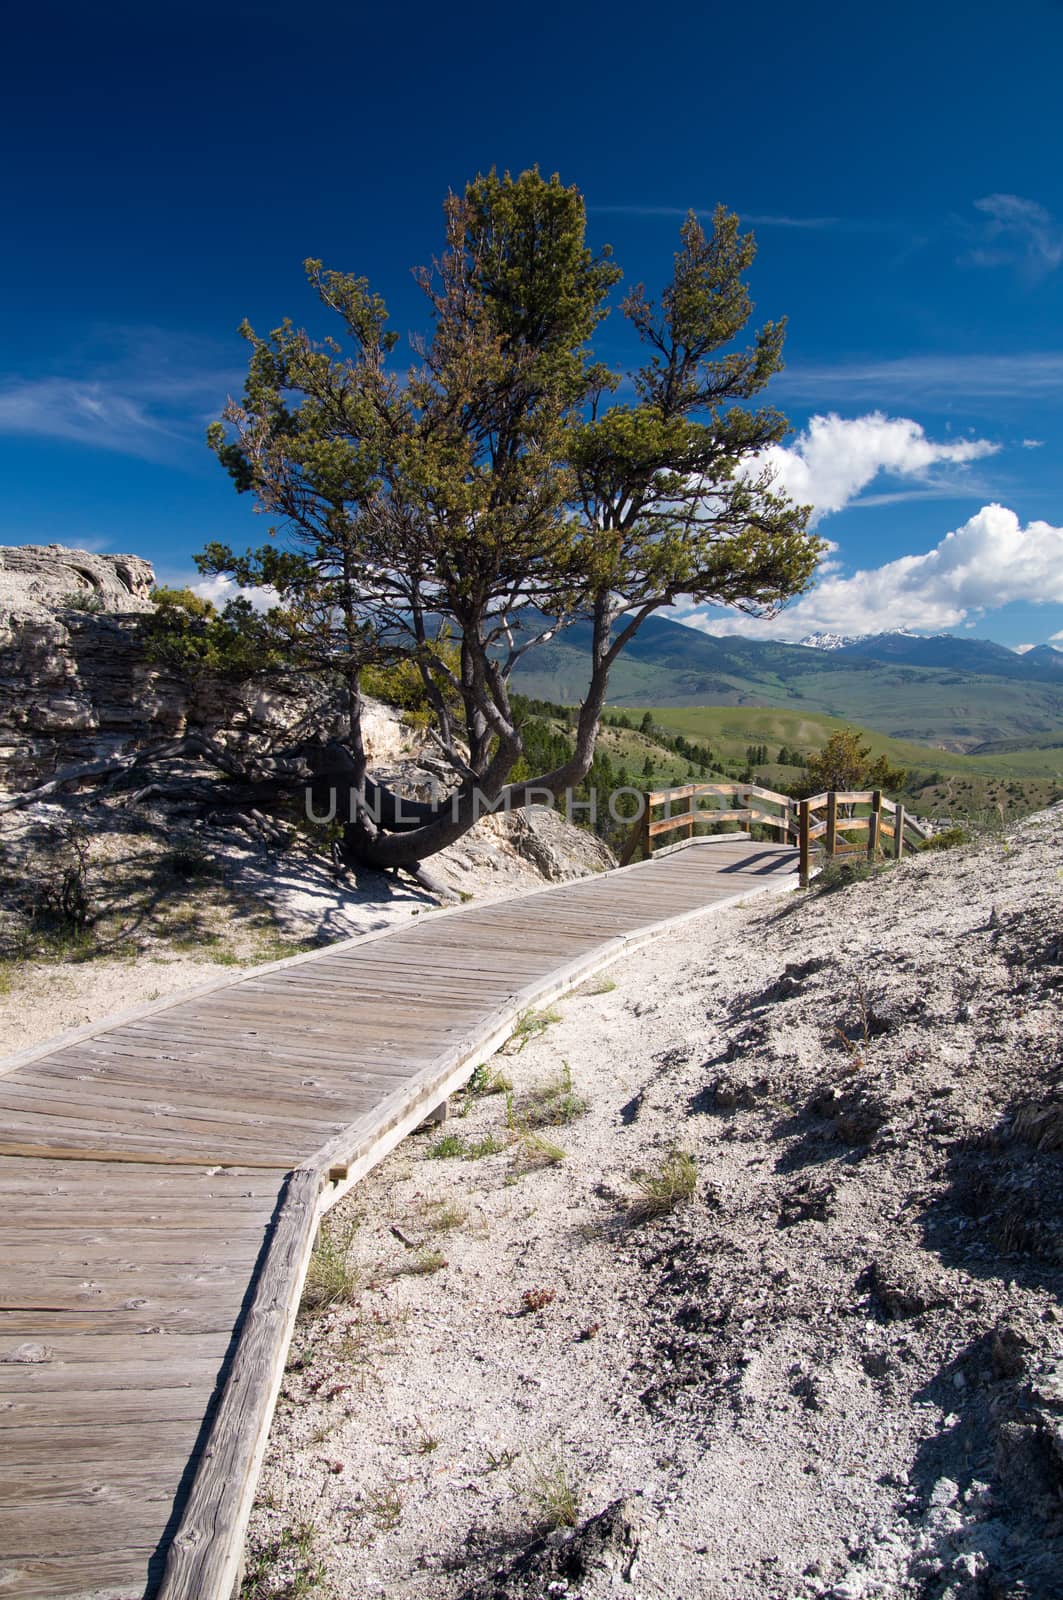 Tree on edge of boardwalk in Mammoth Hot Springs, Yellowstone Park